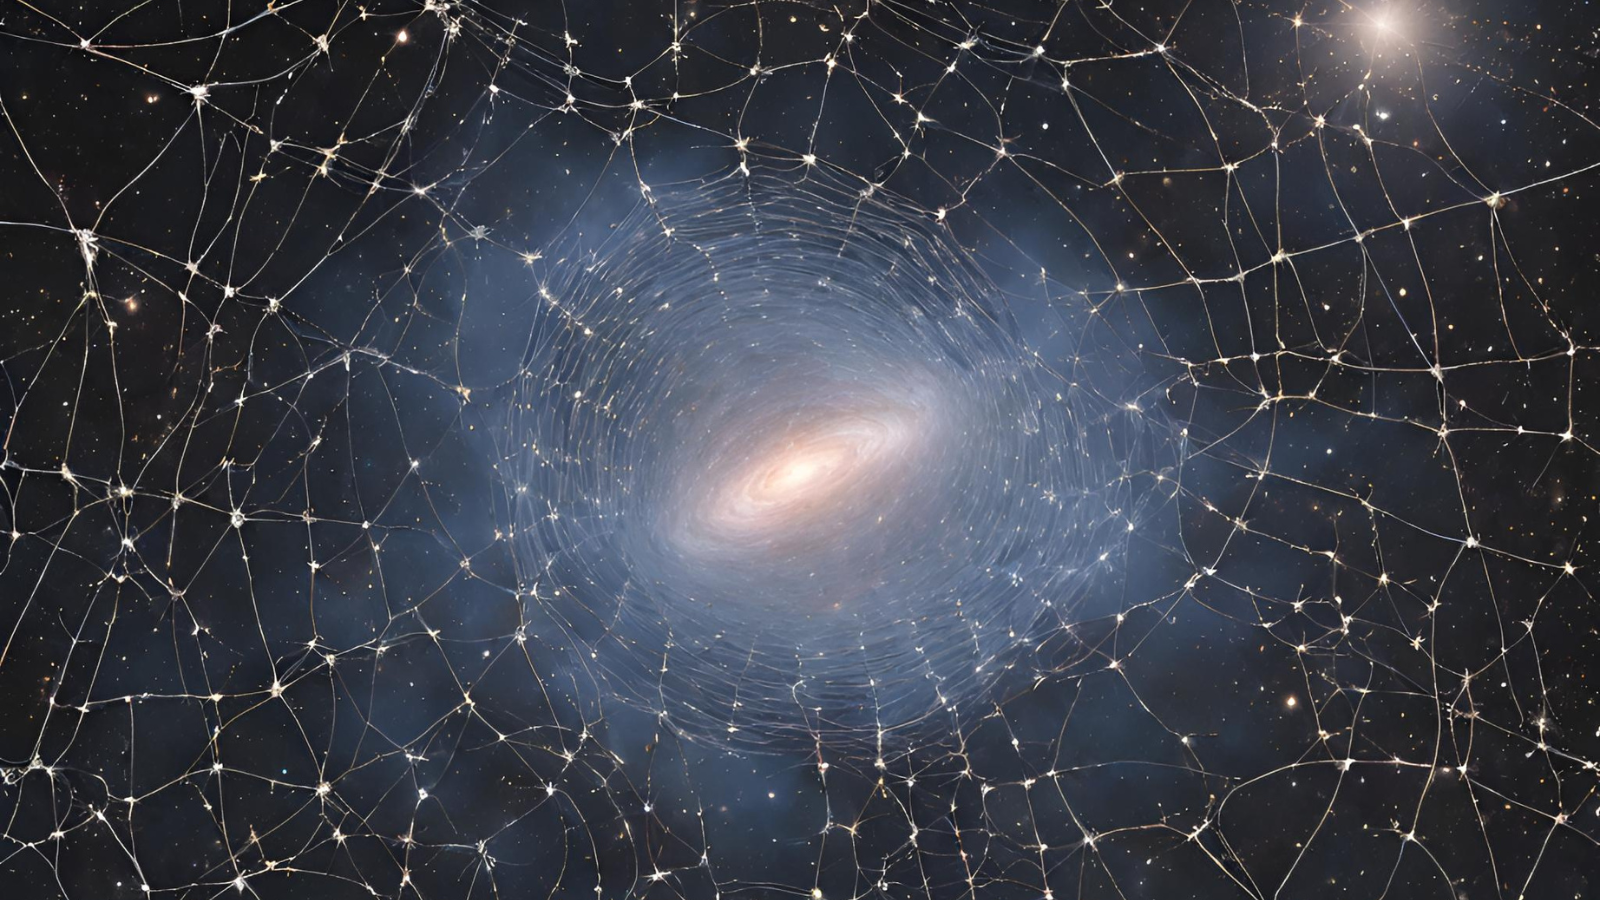 How do galaxies grow while ensnared in the universe's cosmic web?